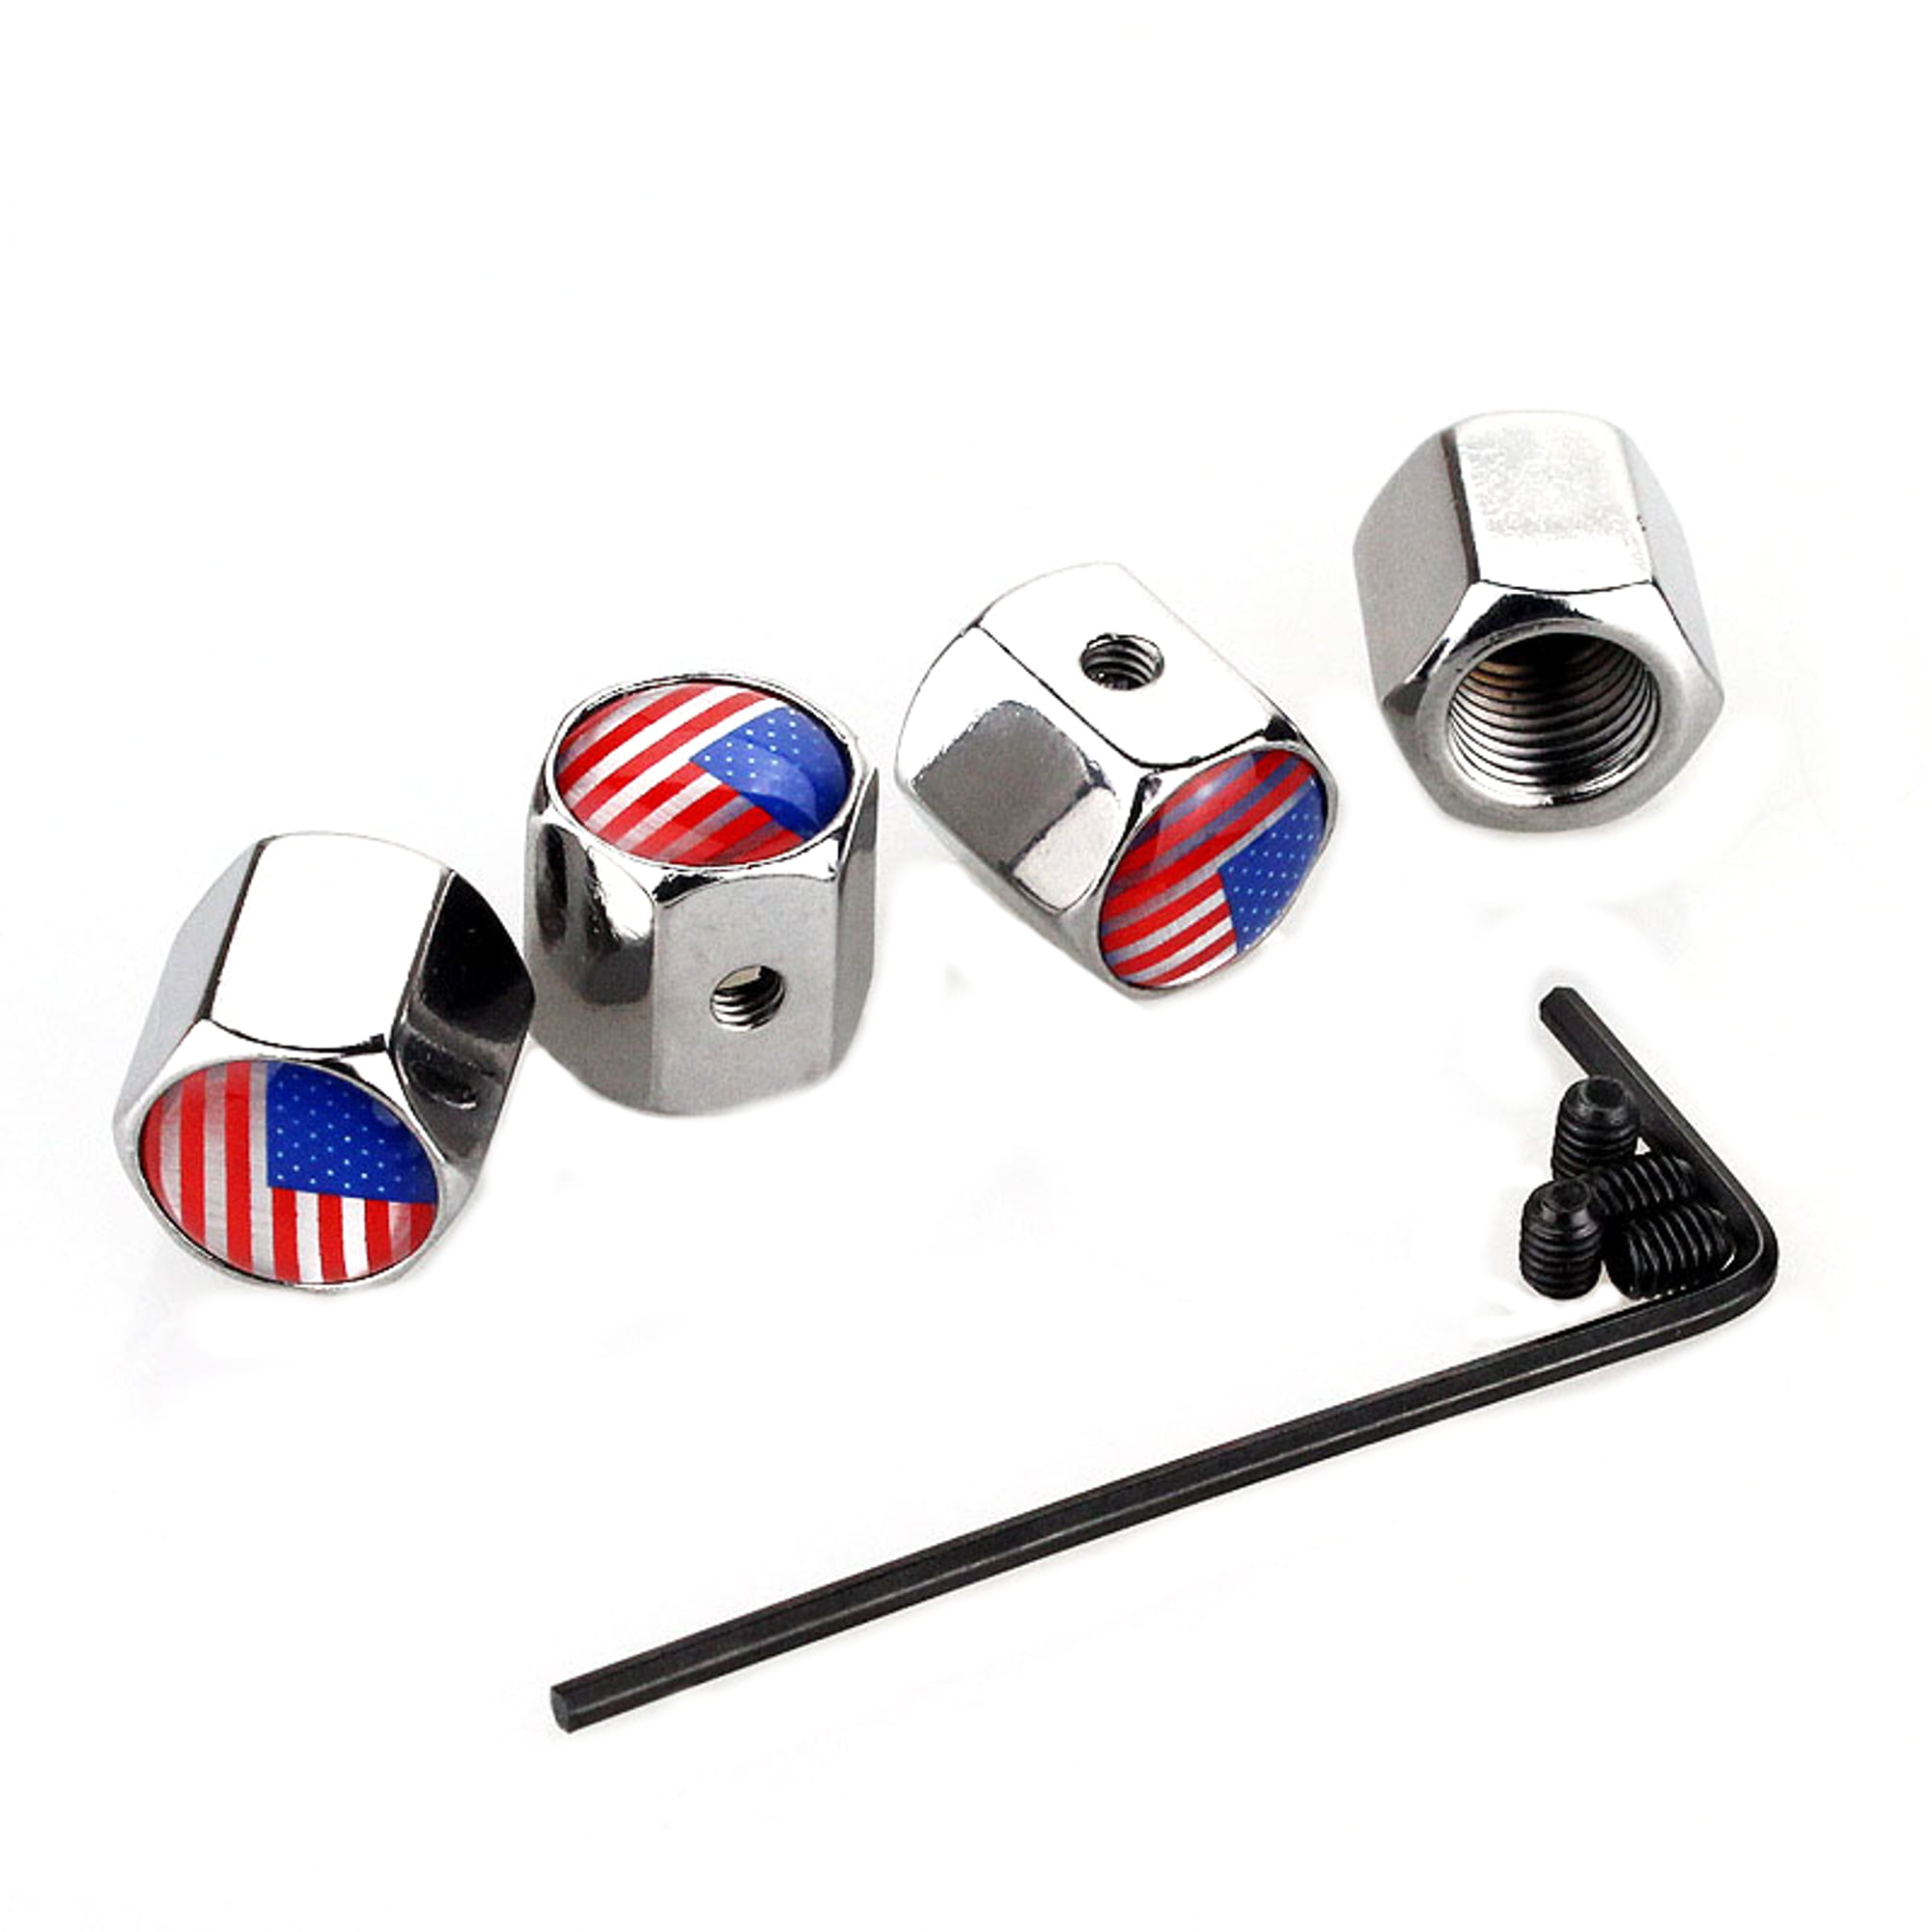 Keychain with United States of America Flag 1pcs 4pcs INCART USA Flag Universal Tire Caps Steel Black Car Tire Valve Stem Air Caps Cover + 